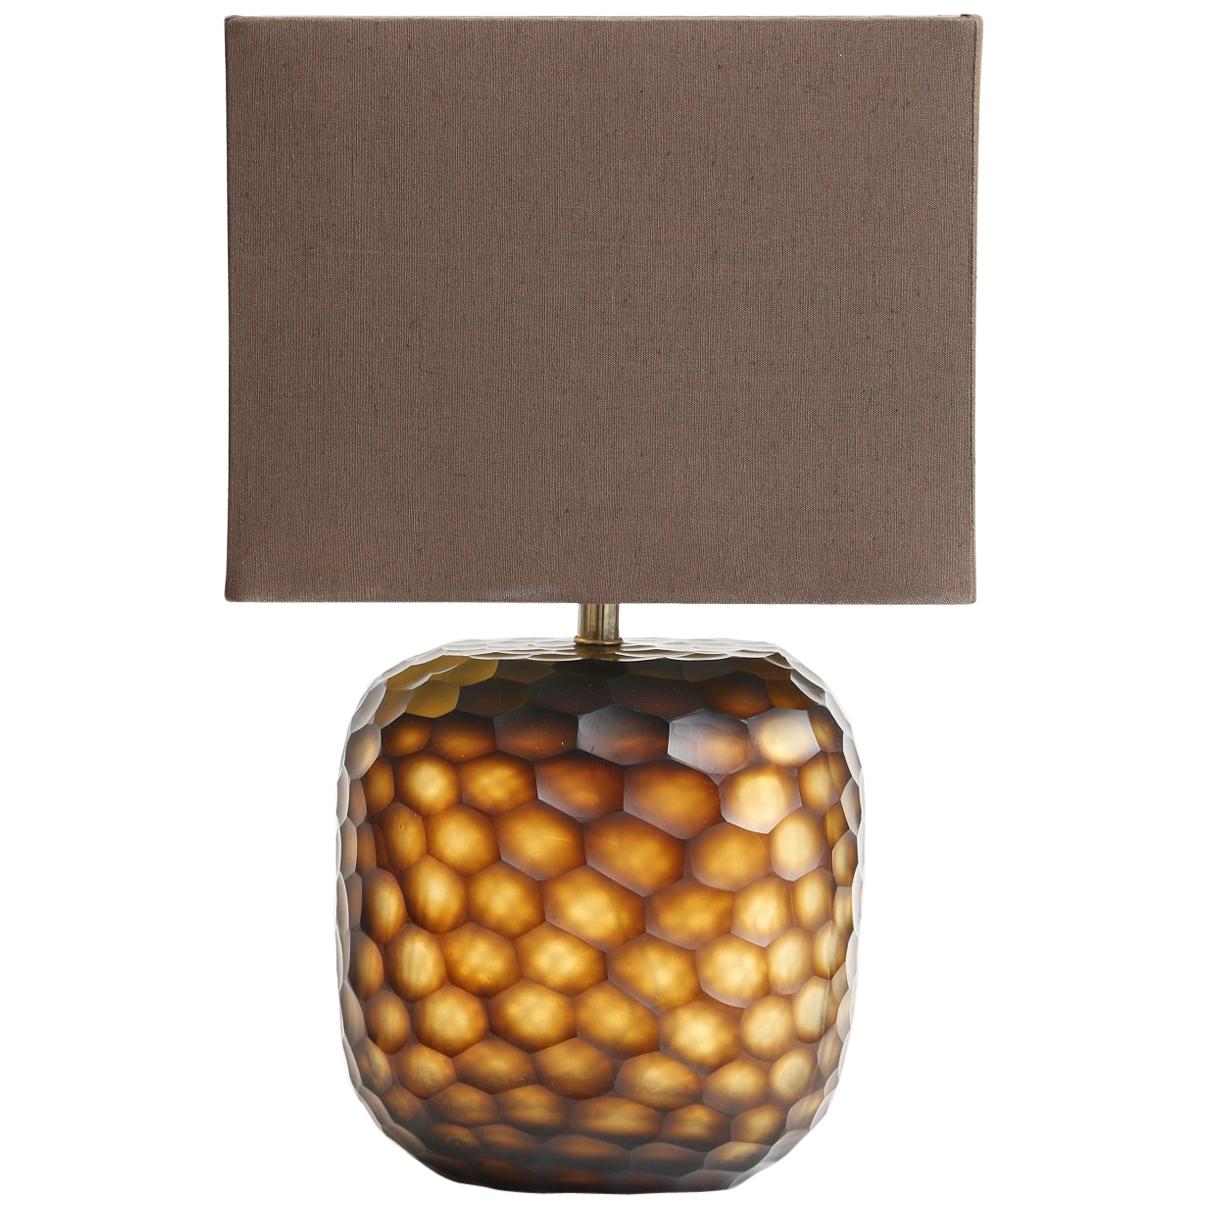 Guaxs Somba Table Lamp, Made in Germany For Sale at 1stDibs